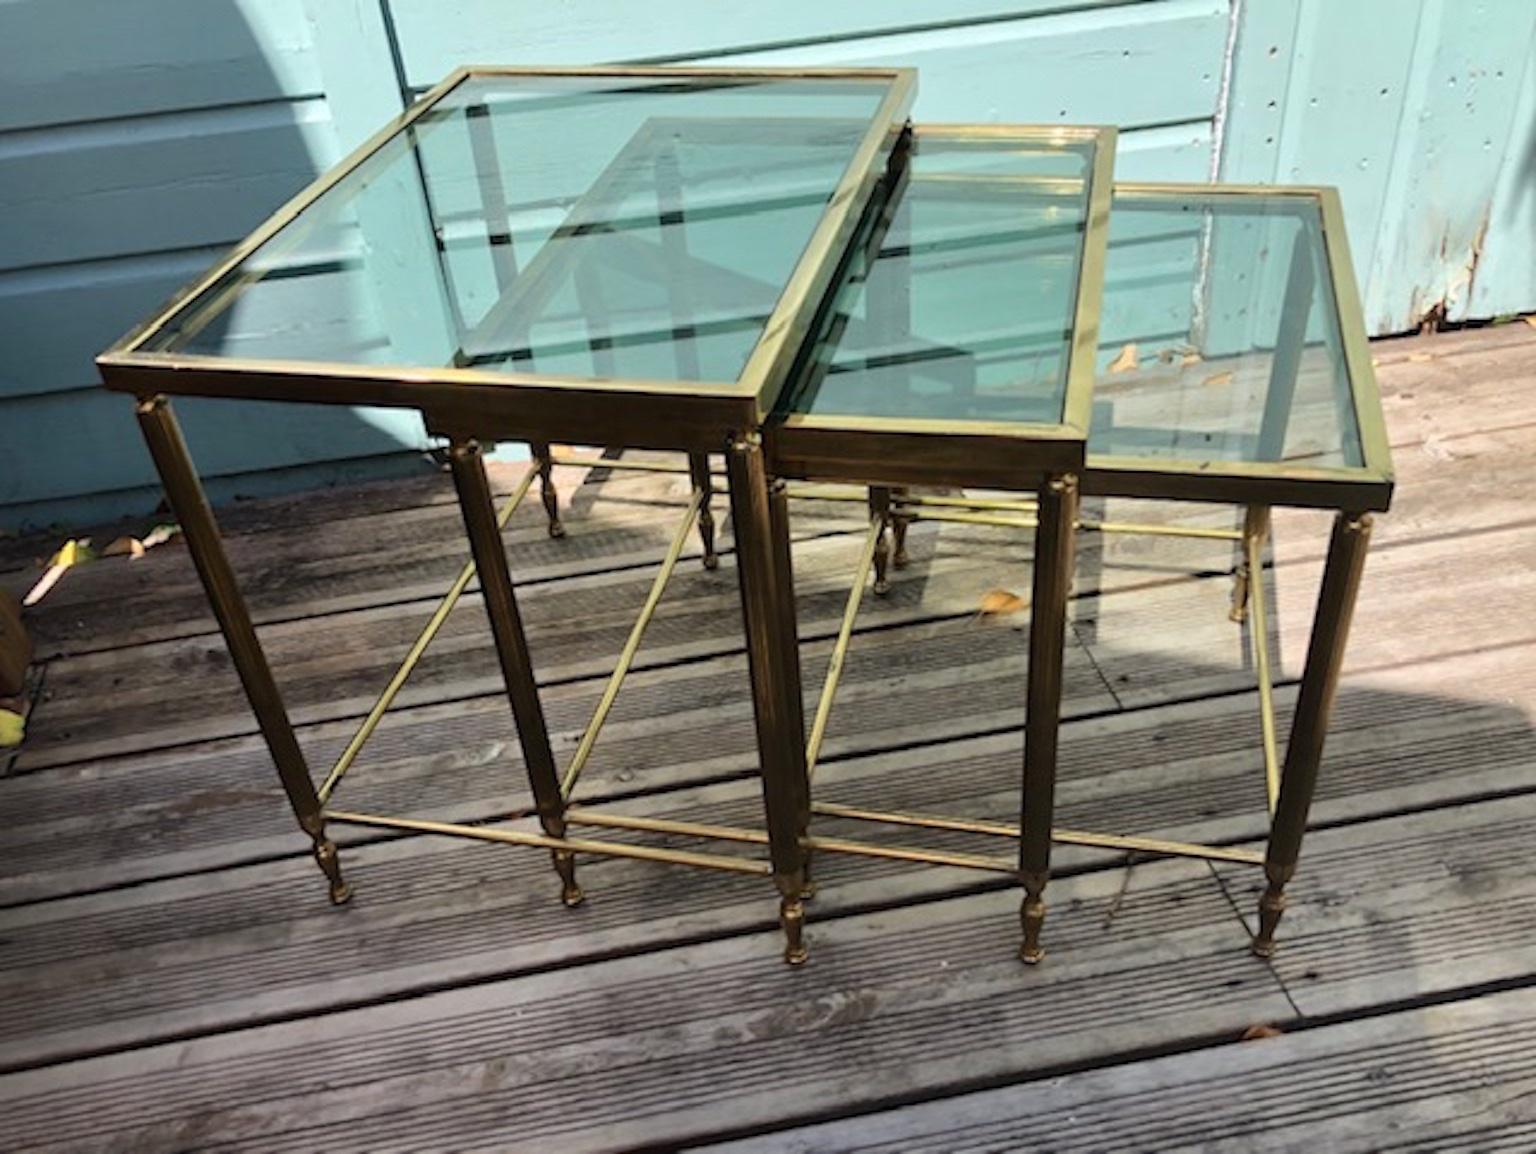 Mid Century French Hollywood Regency brass nest of tables, French, circa 1950s

A set of superb quality midcentury French brass nesting tables, produced in France during the 1950s, Attributed to Maison Jansen. 

The neoclassical and modernist